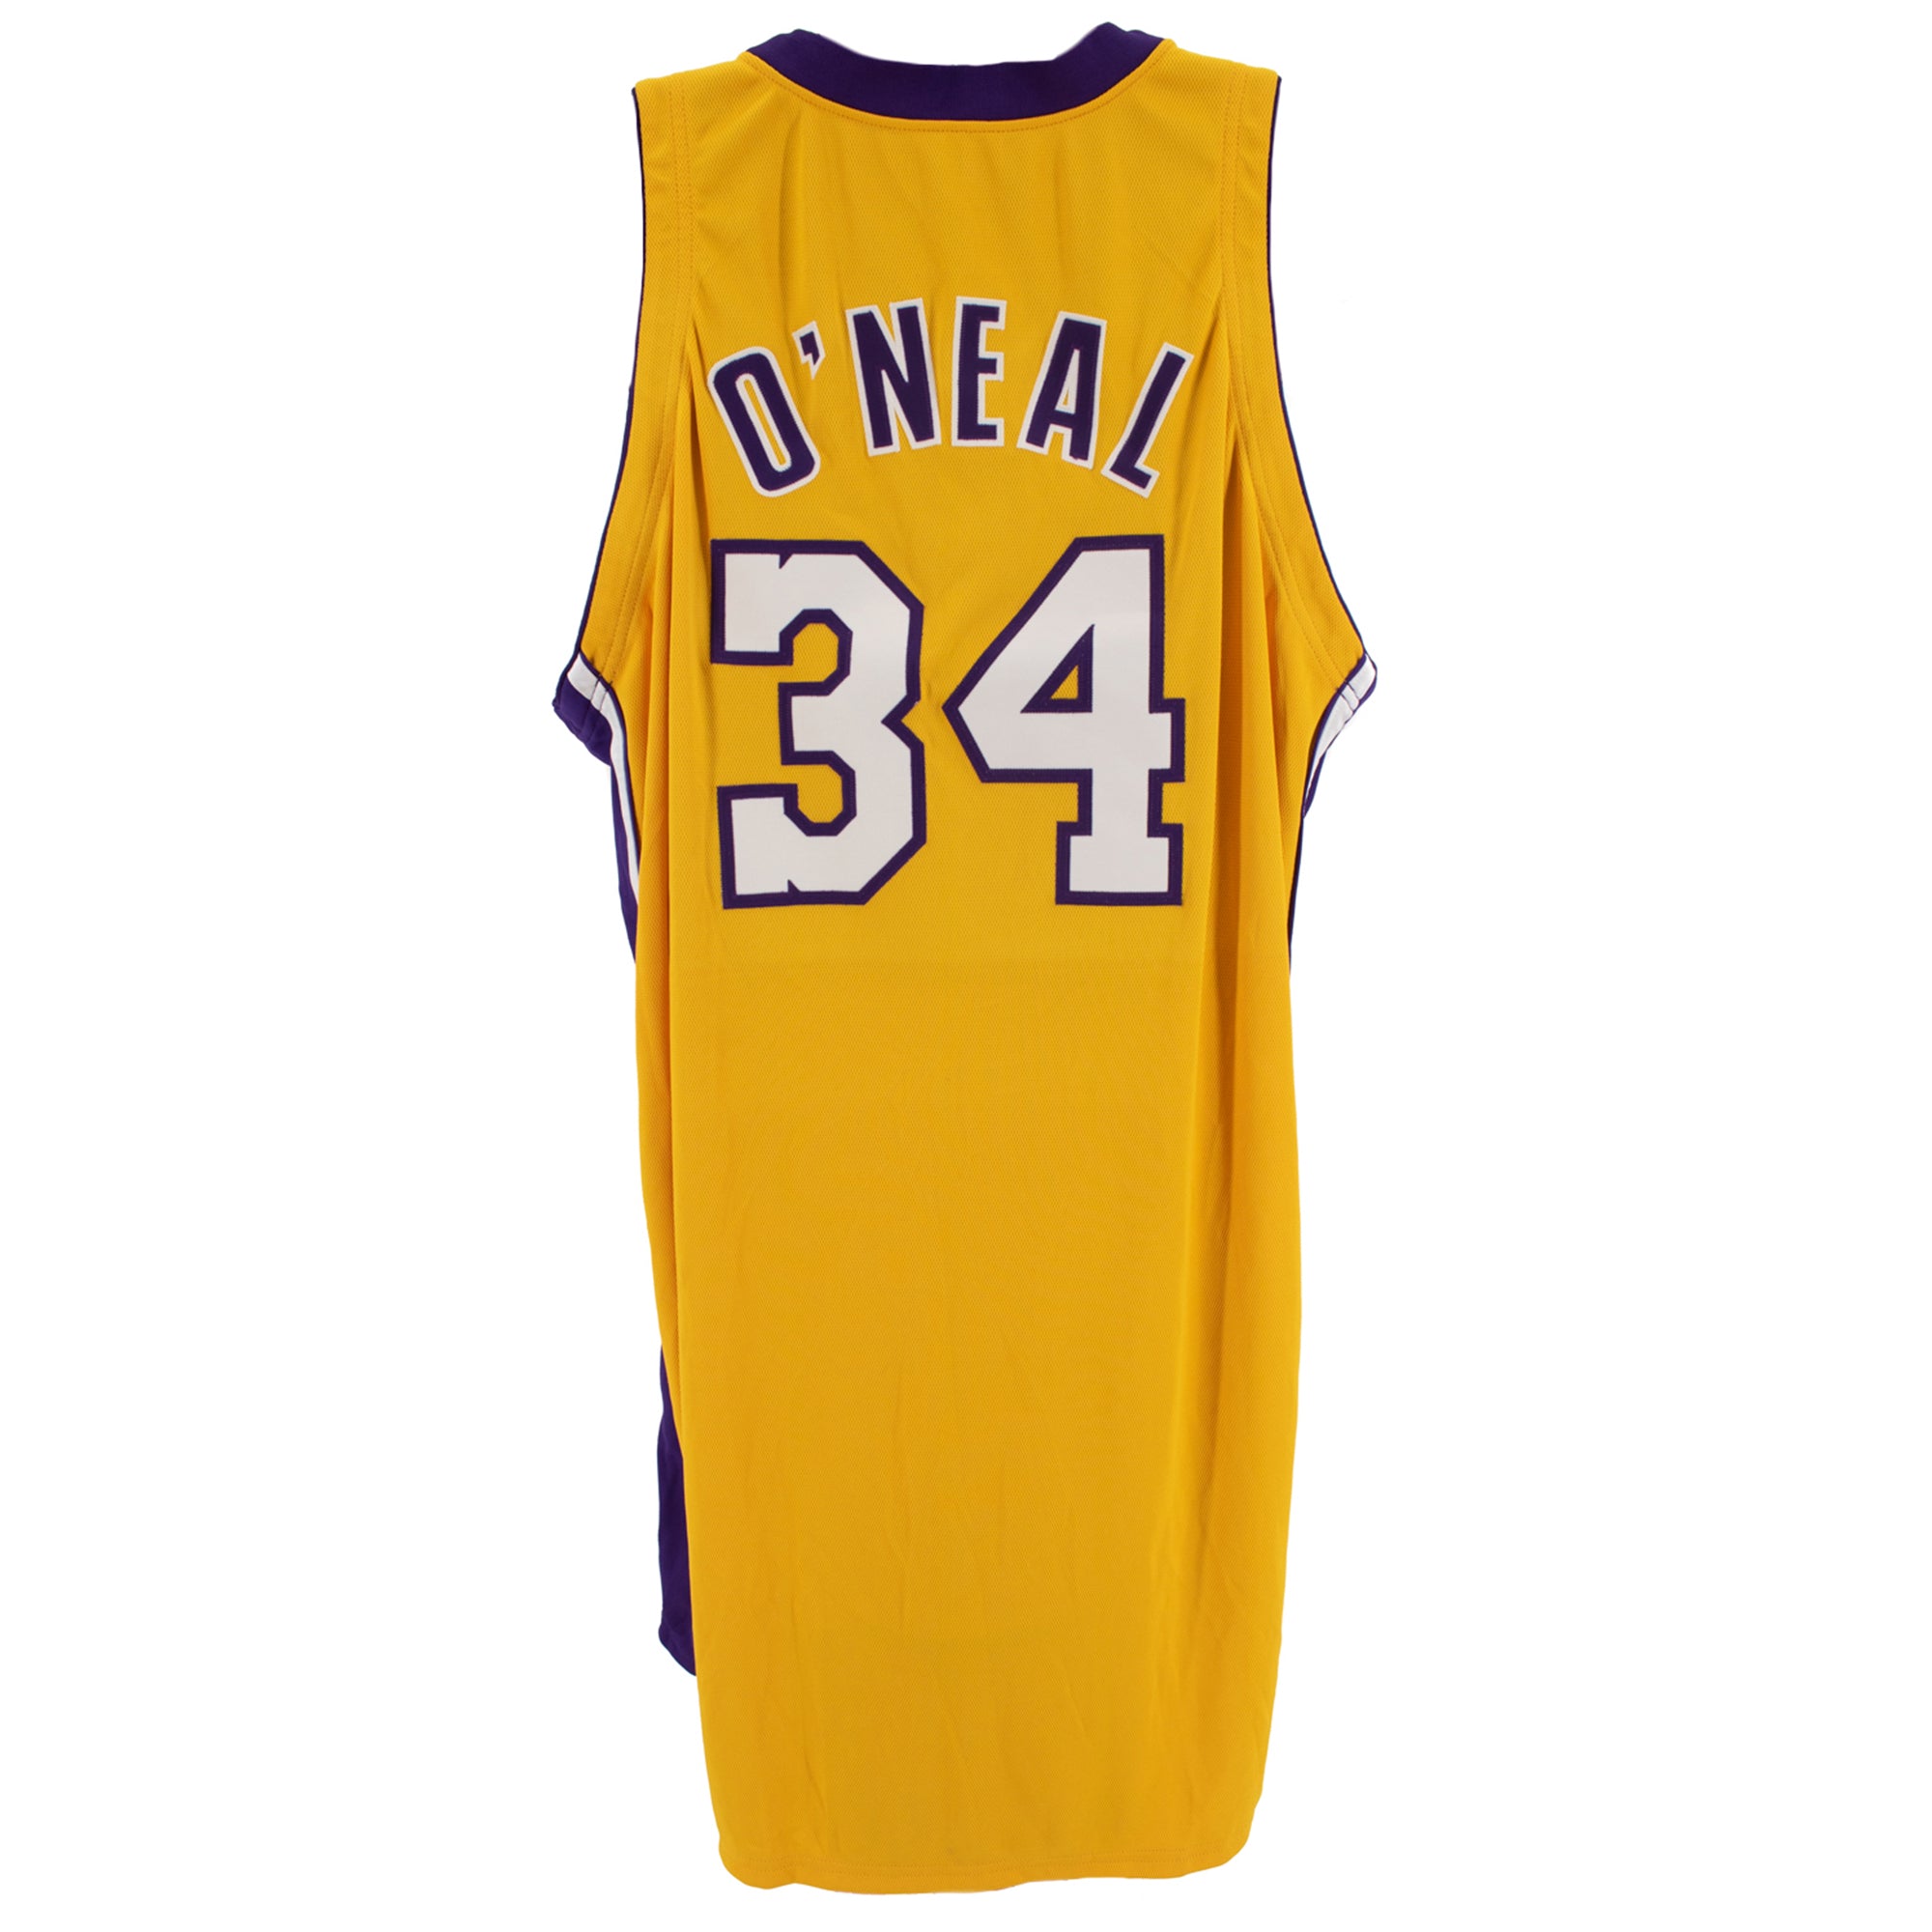 Shaquille O'Neal 2000 Game Worn Jersey